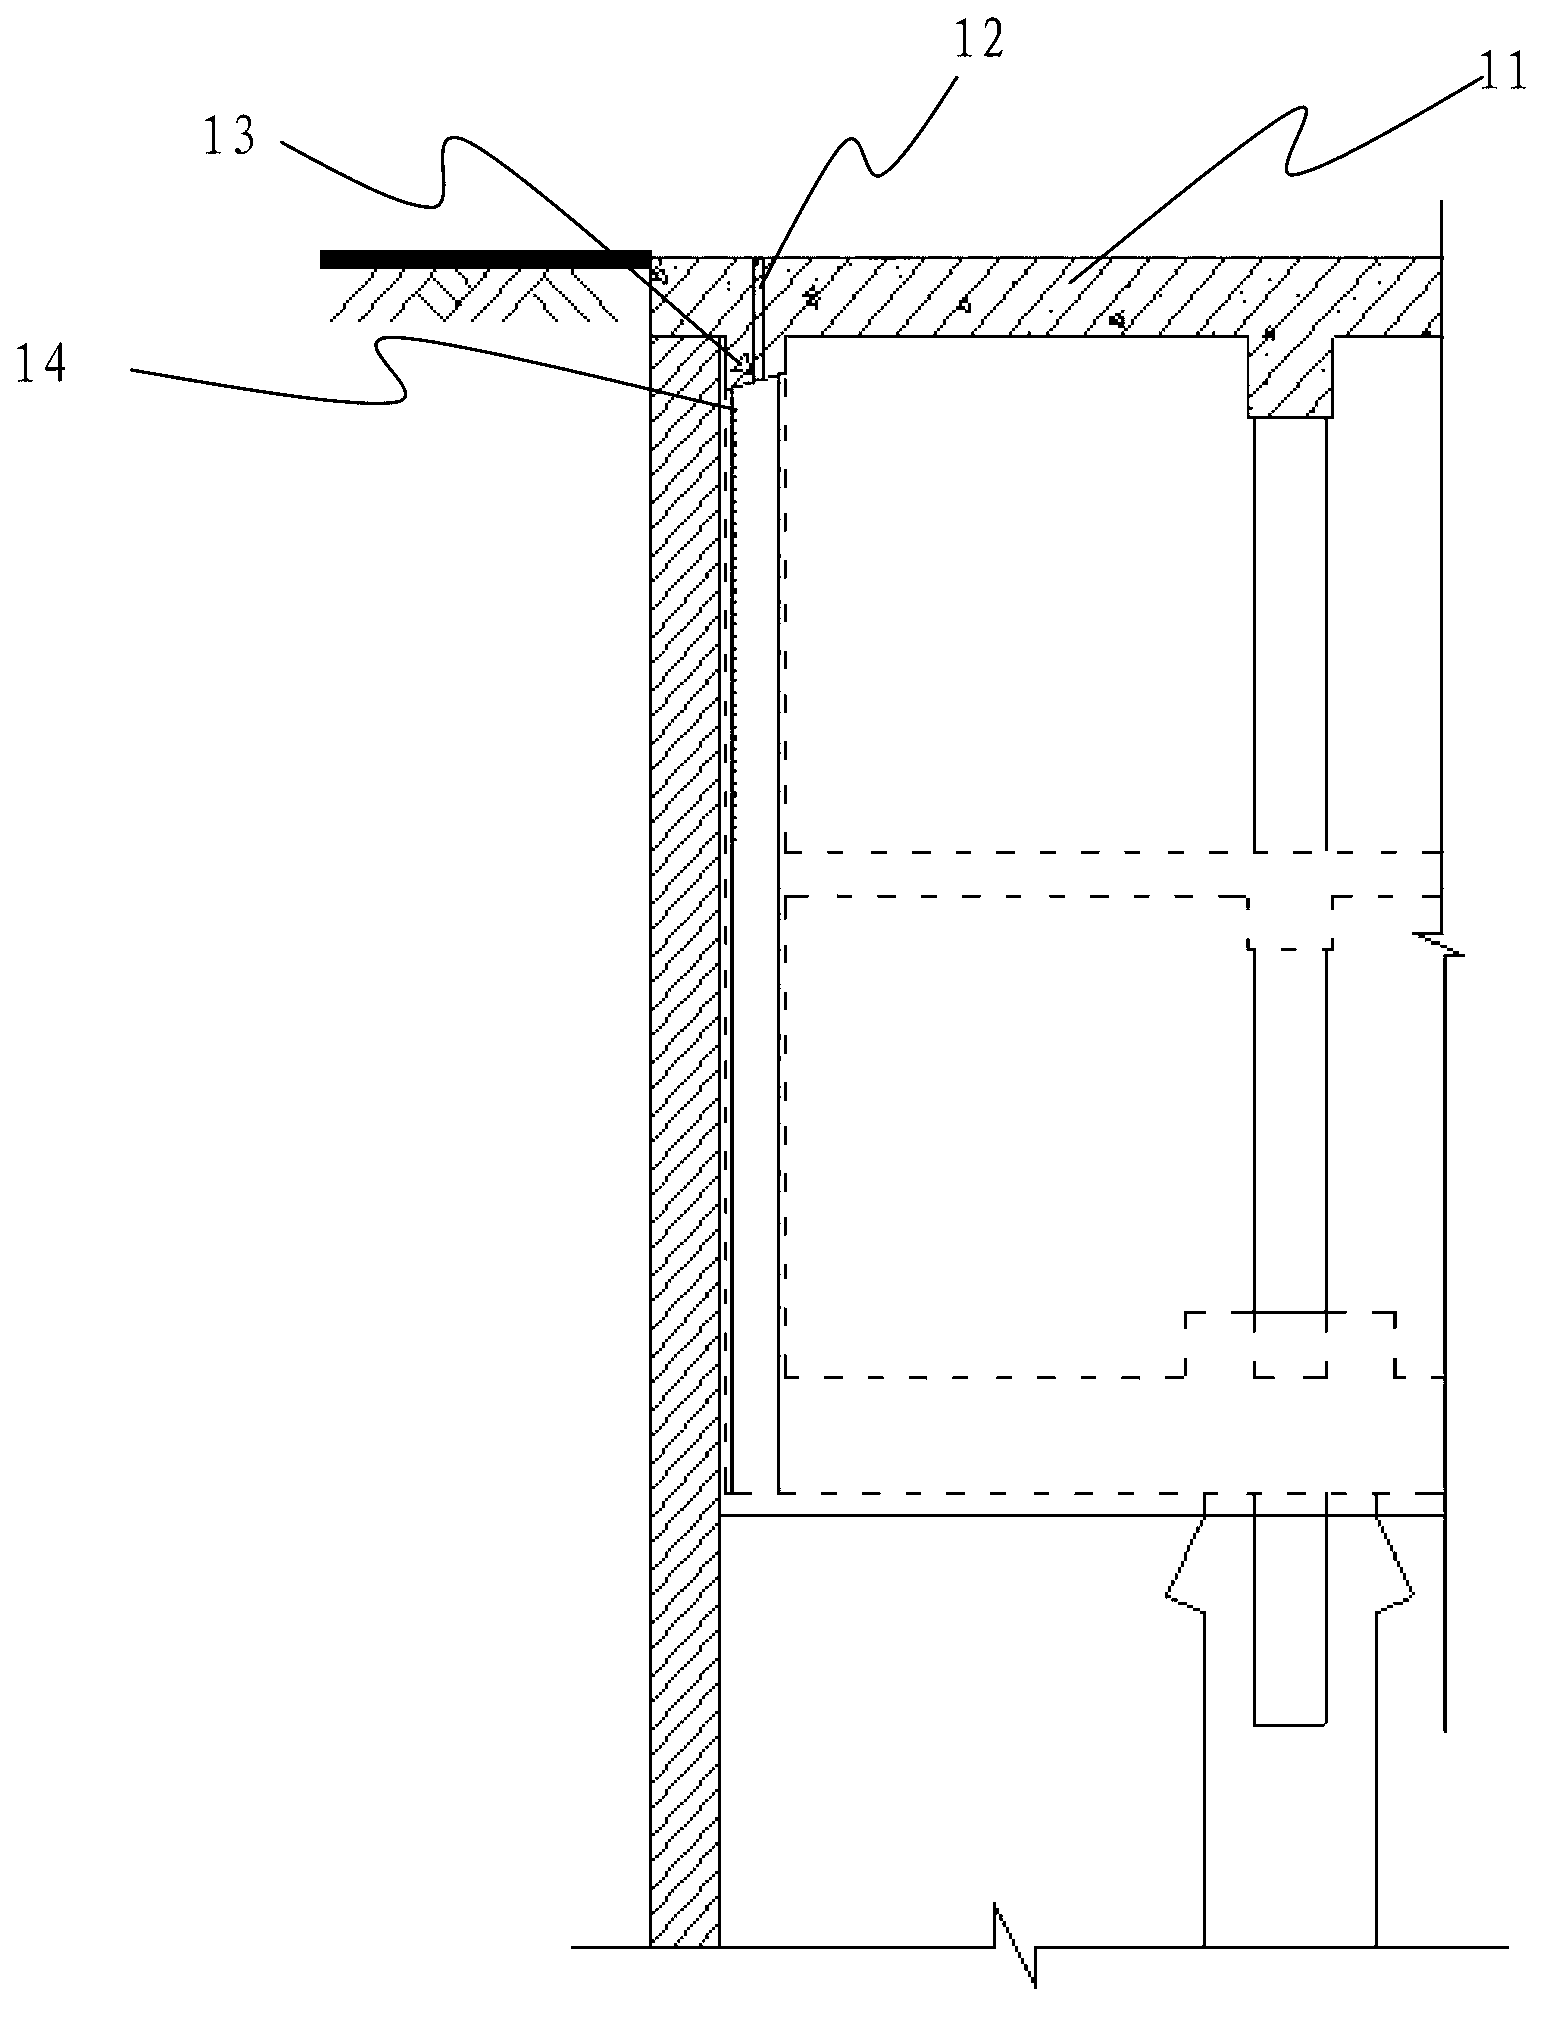 Construction method of cover-and-cut reverse construction concrete walls and columns with vertical structures